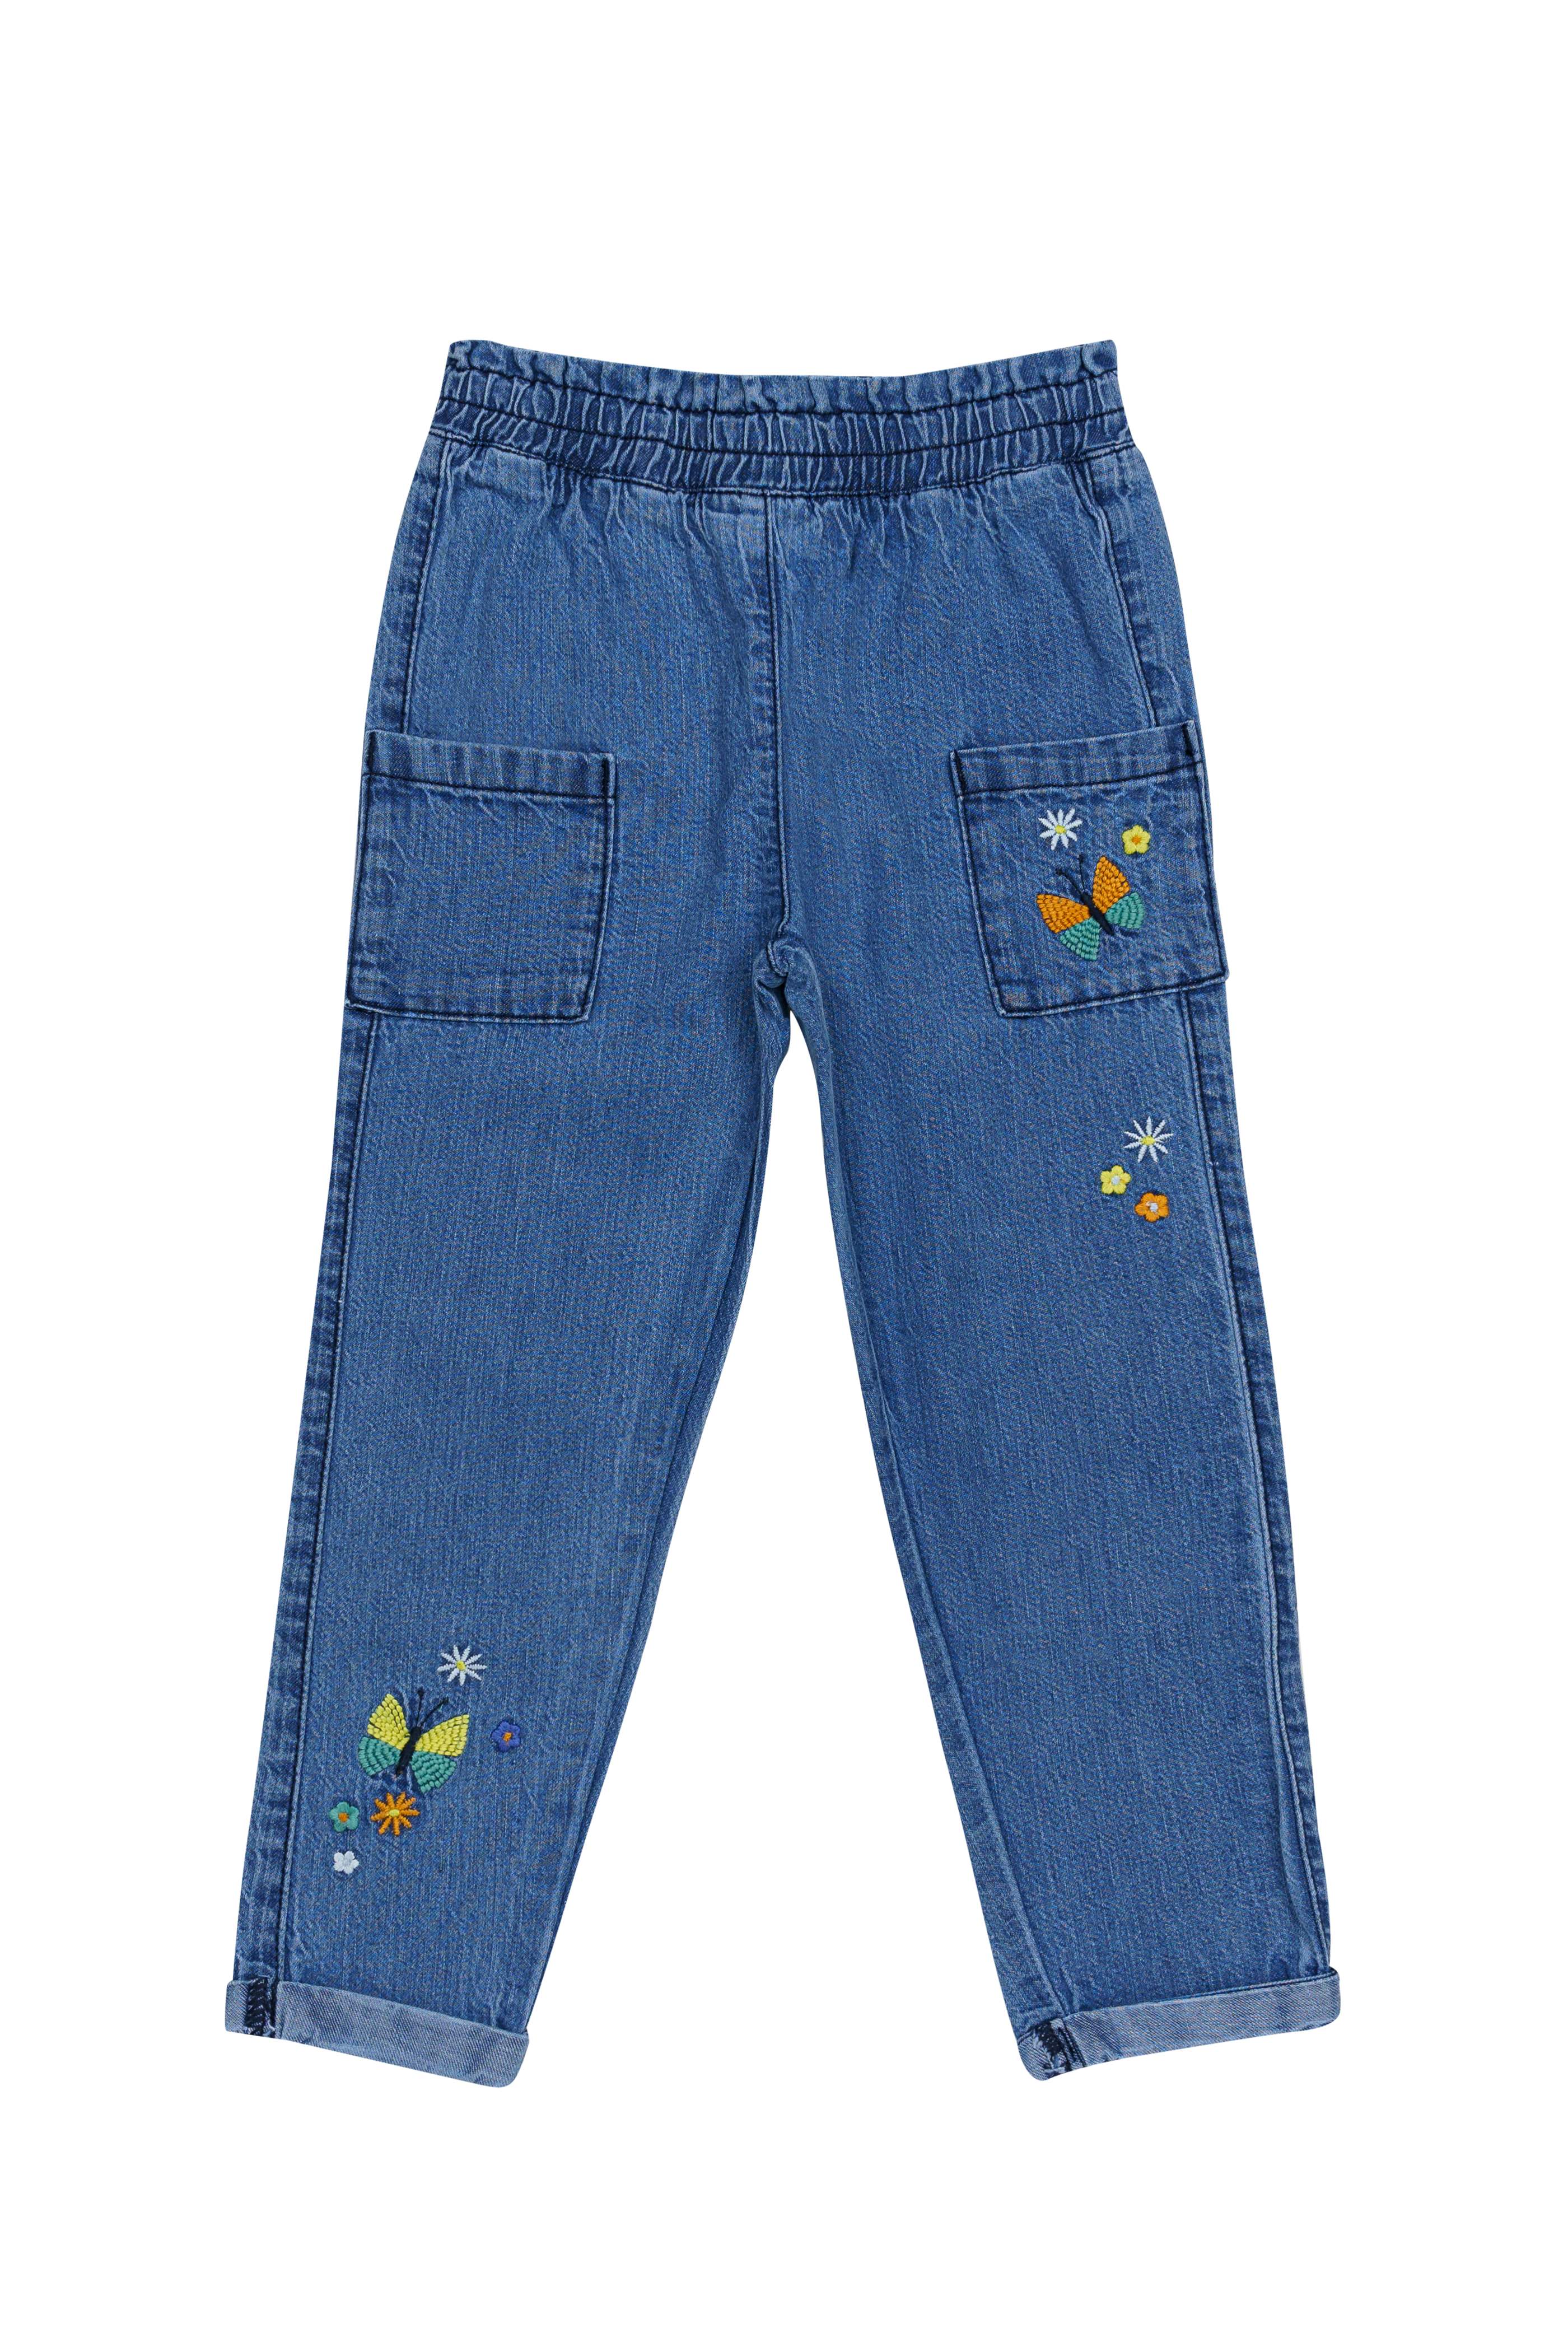 H by Hamleys Girls Embroidered Blue Jeans